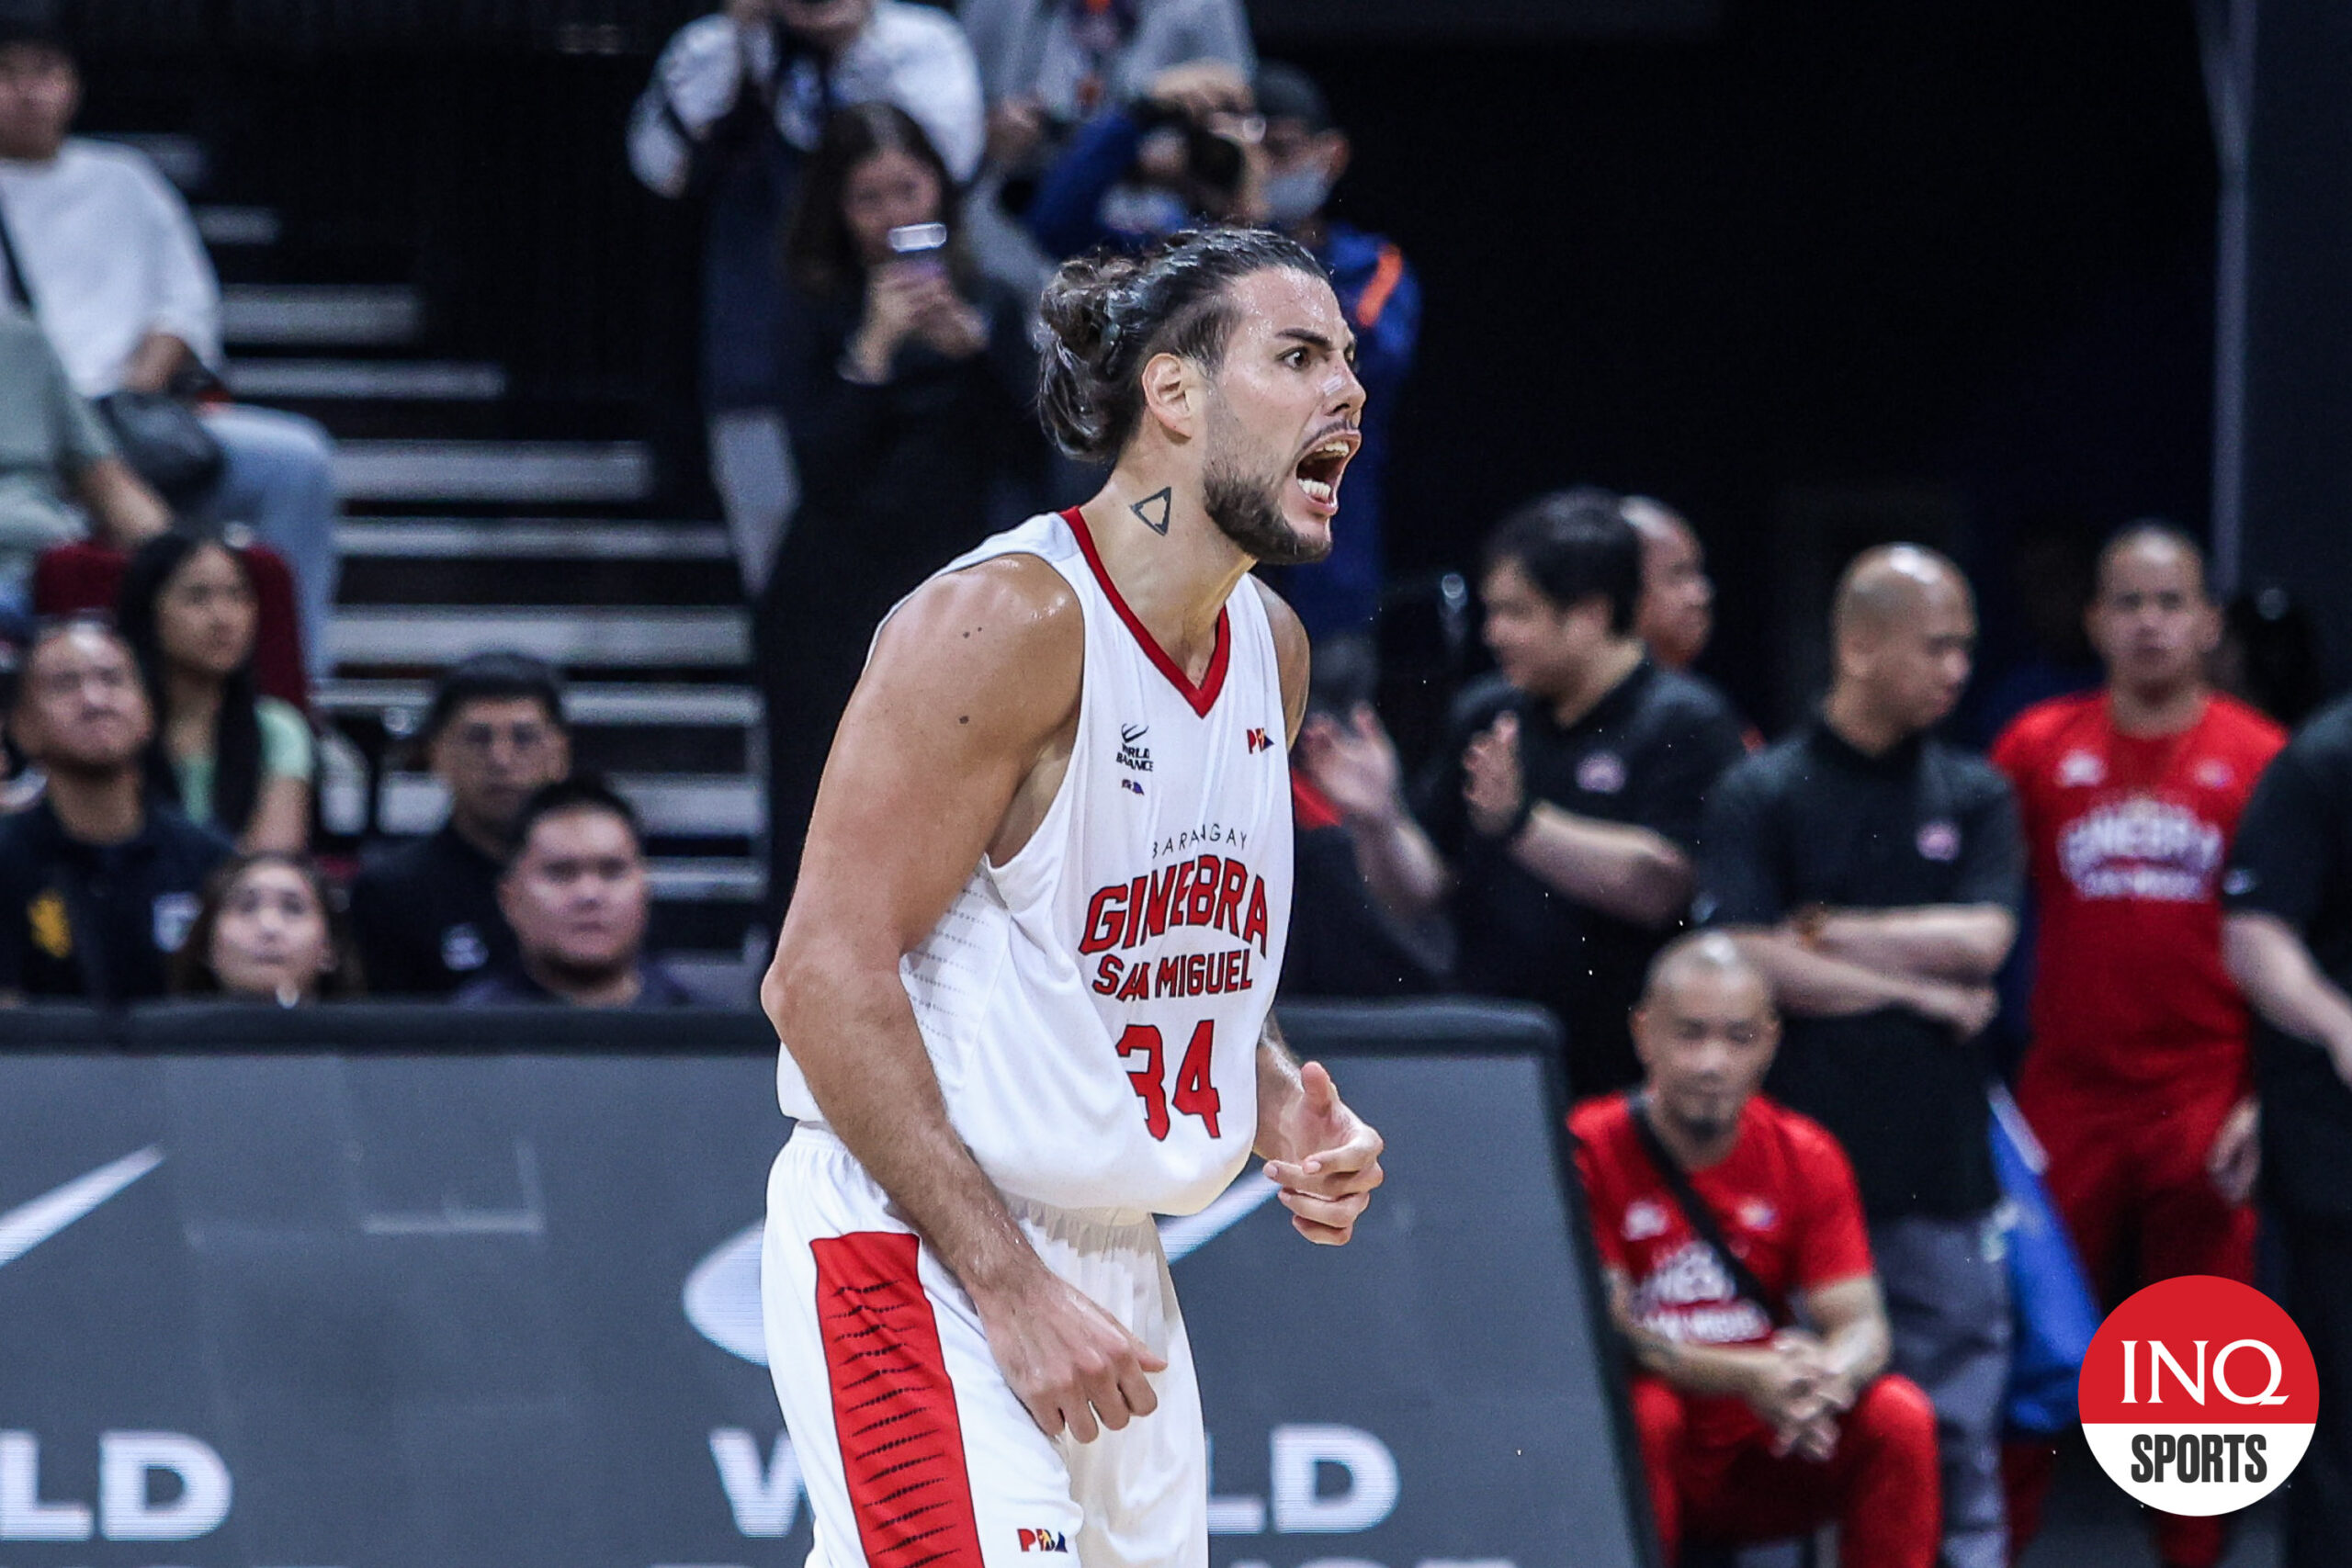 Ginebra Gin Kings' Christian Standhardinger in the PBA Philippine Cup semifinals